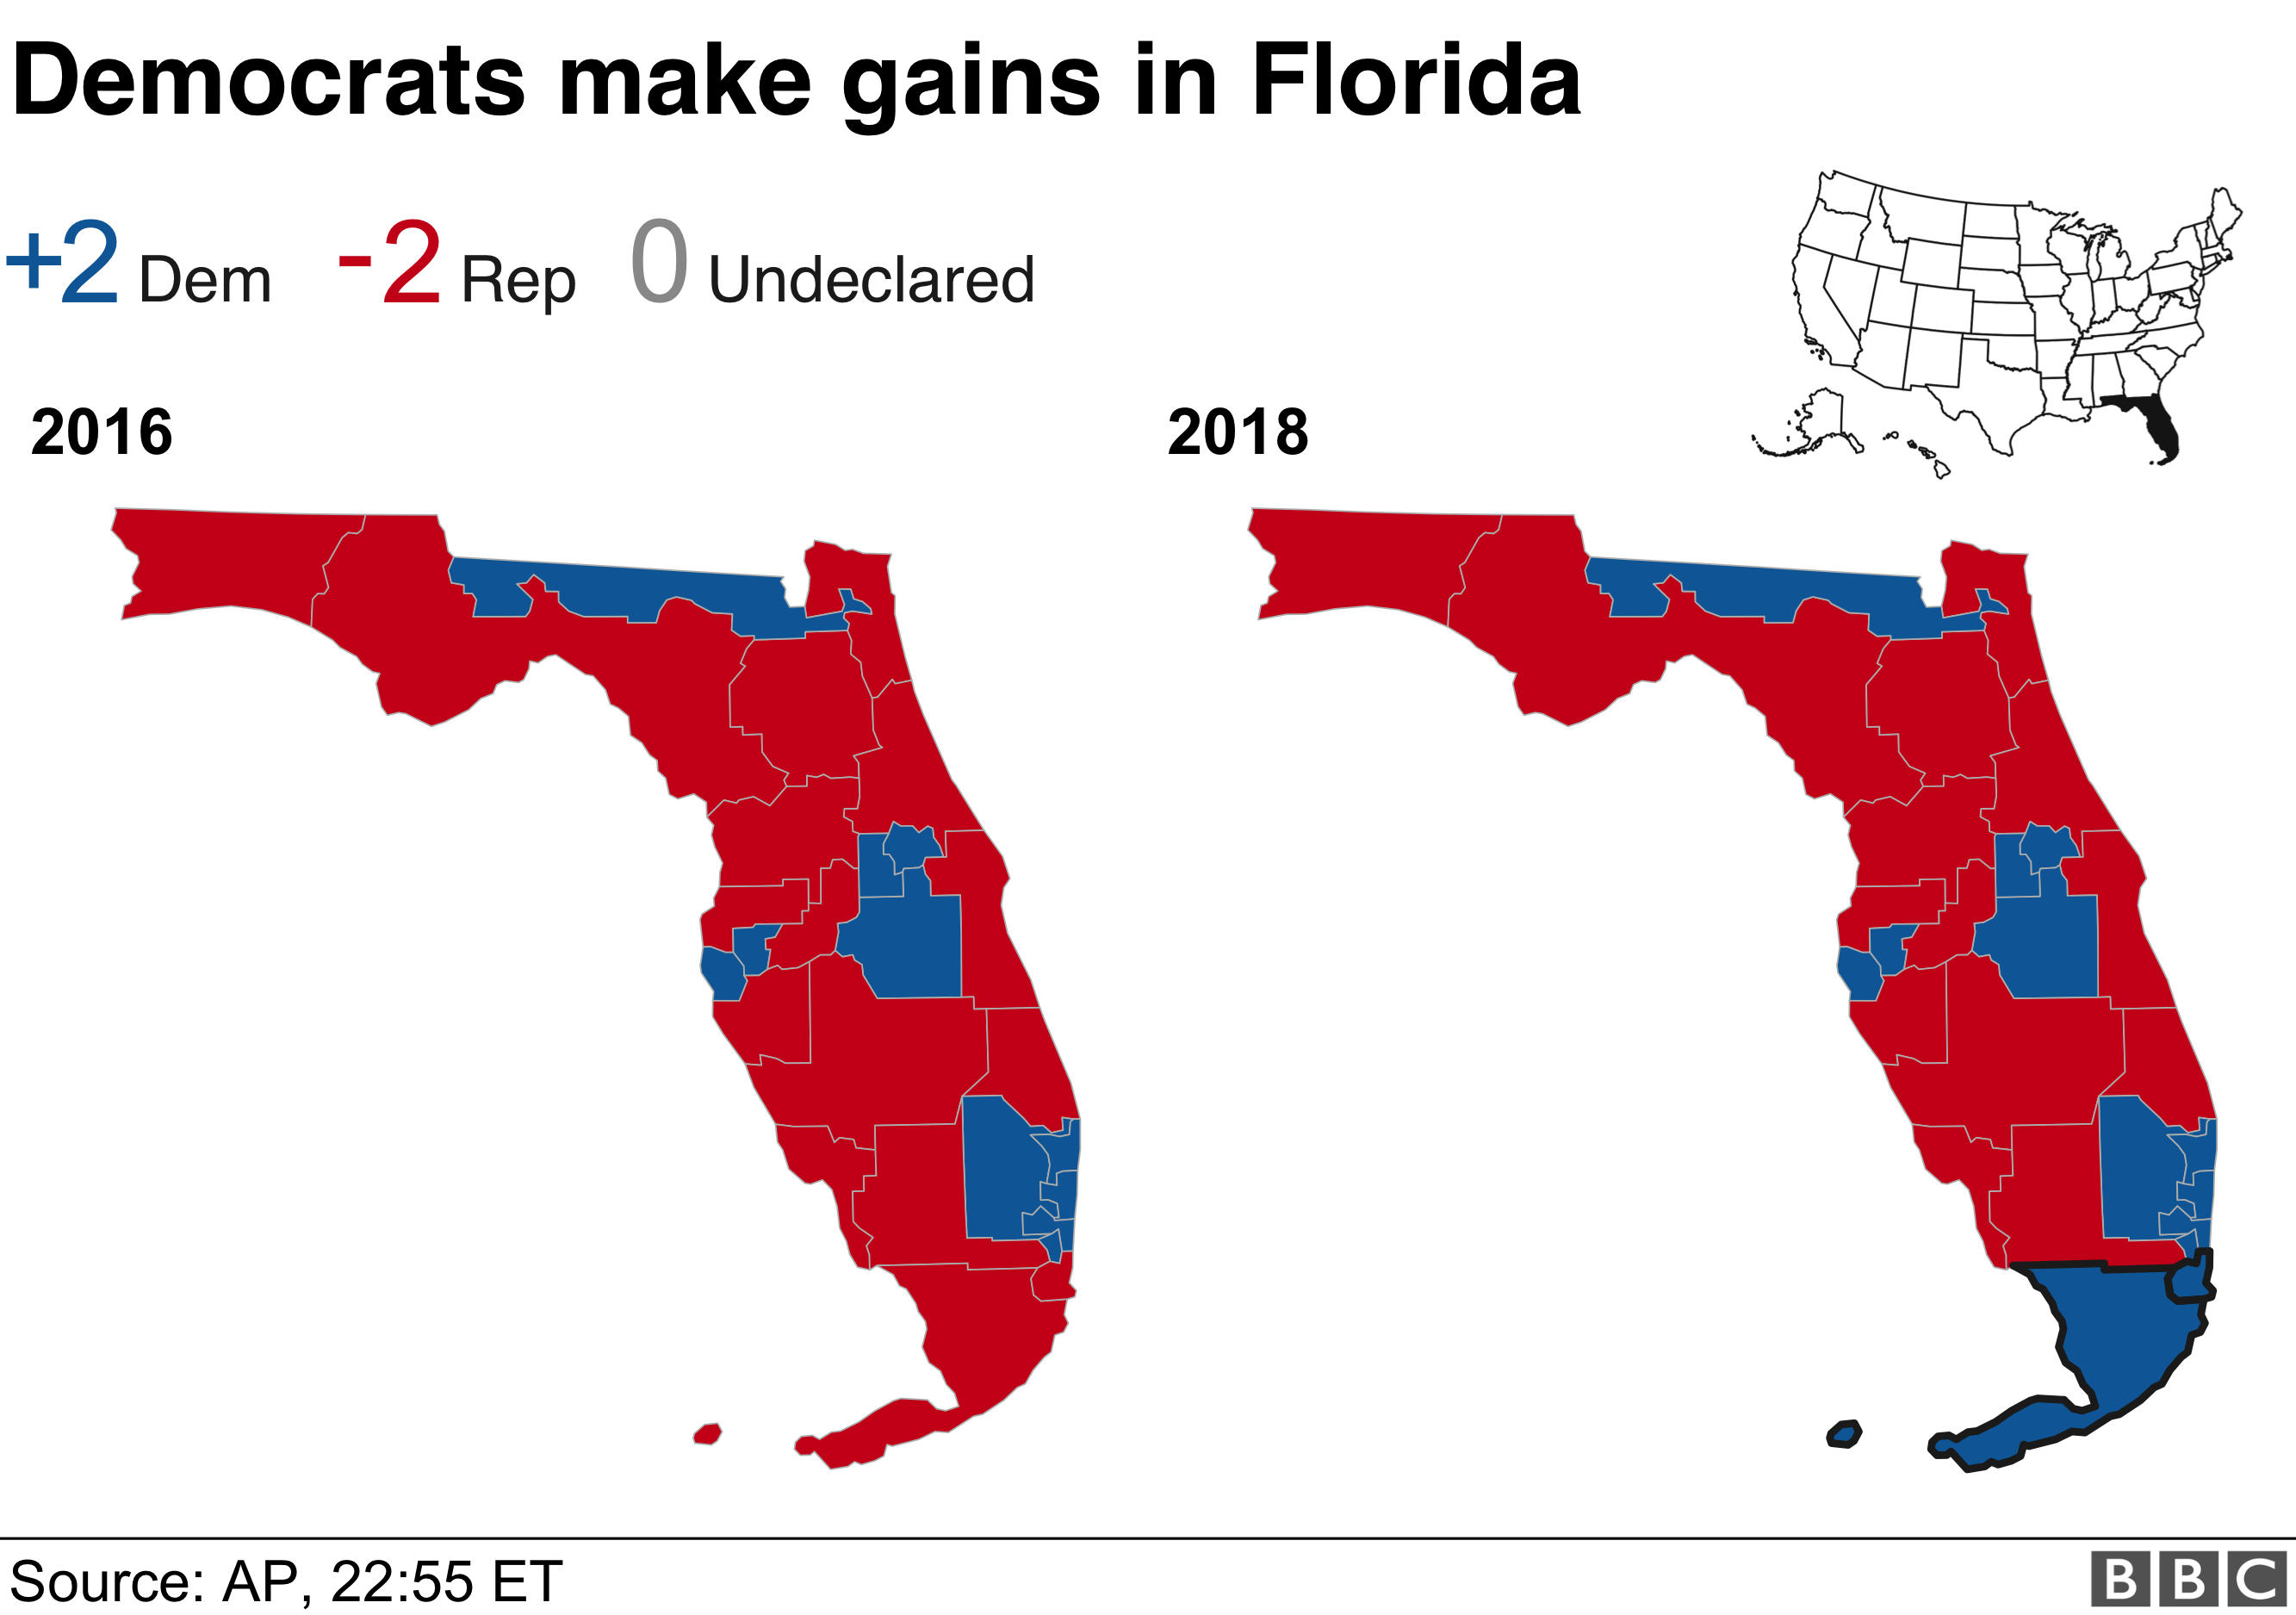 Democrats make two gains in Florida